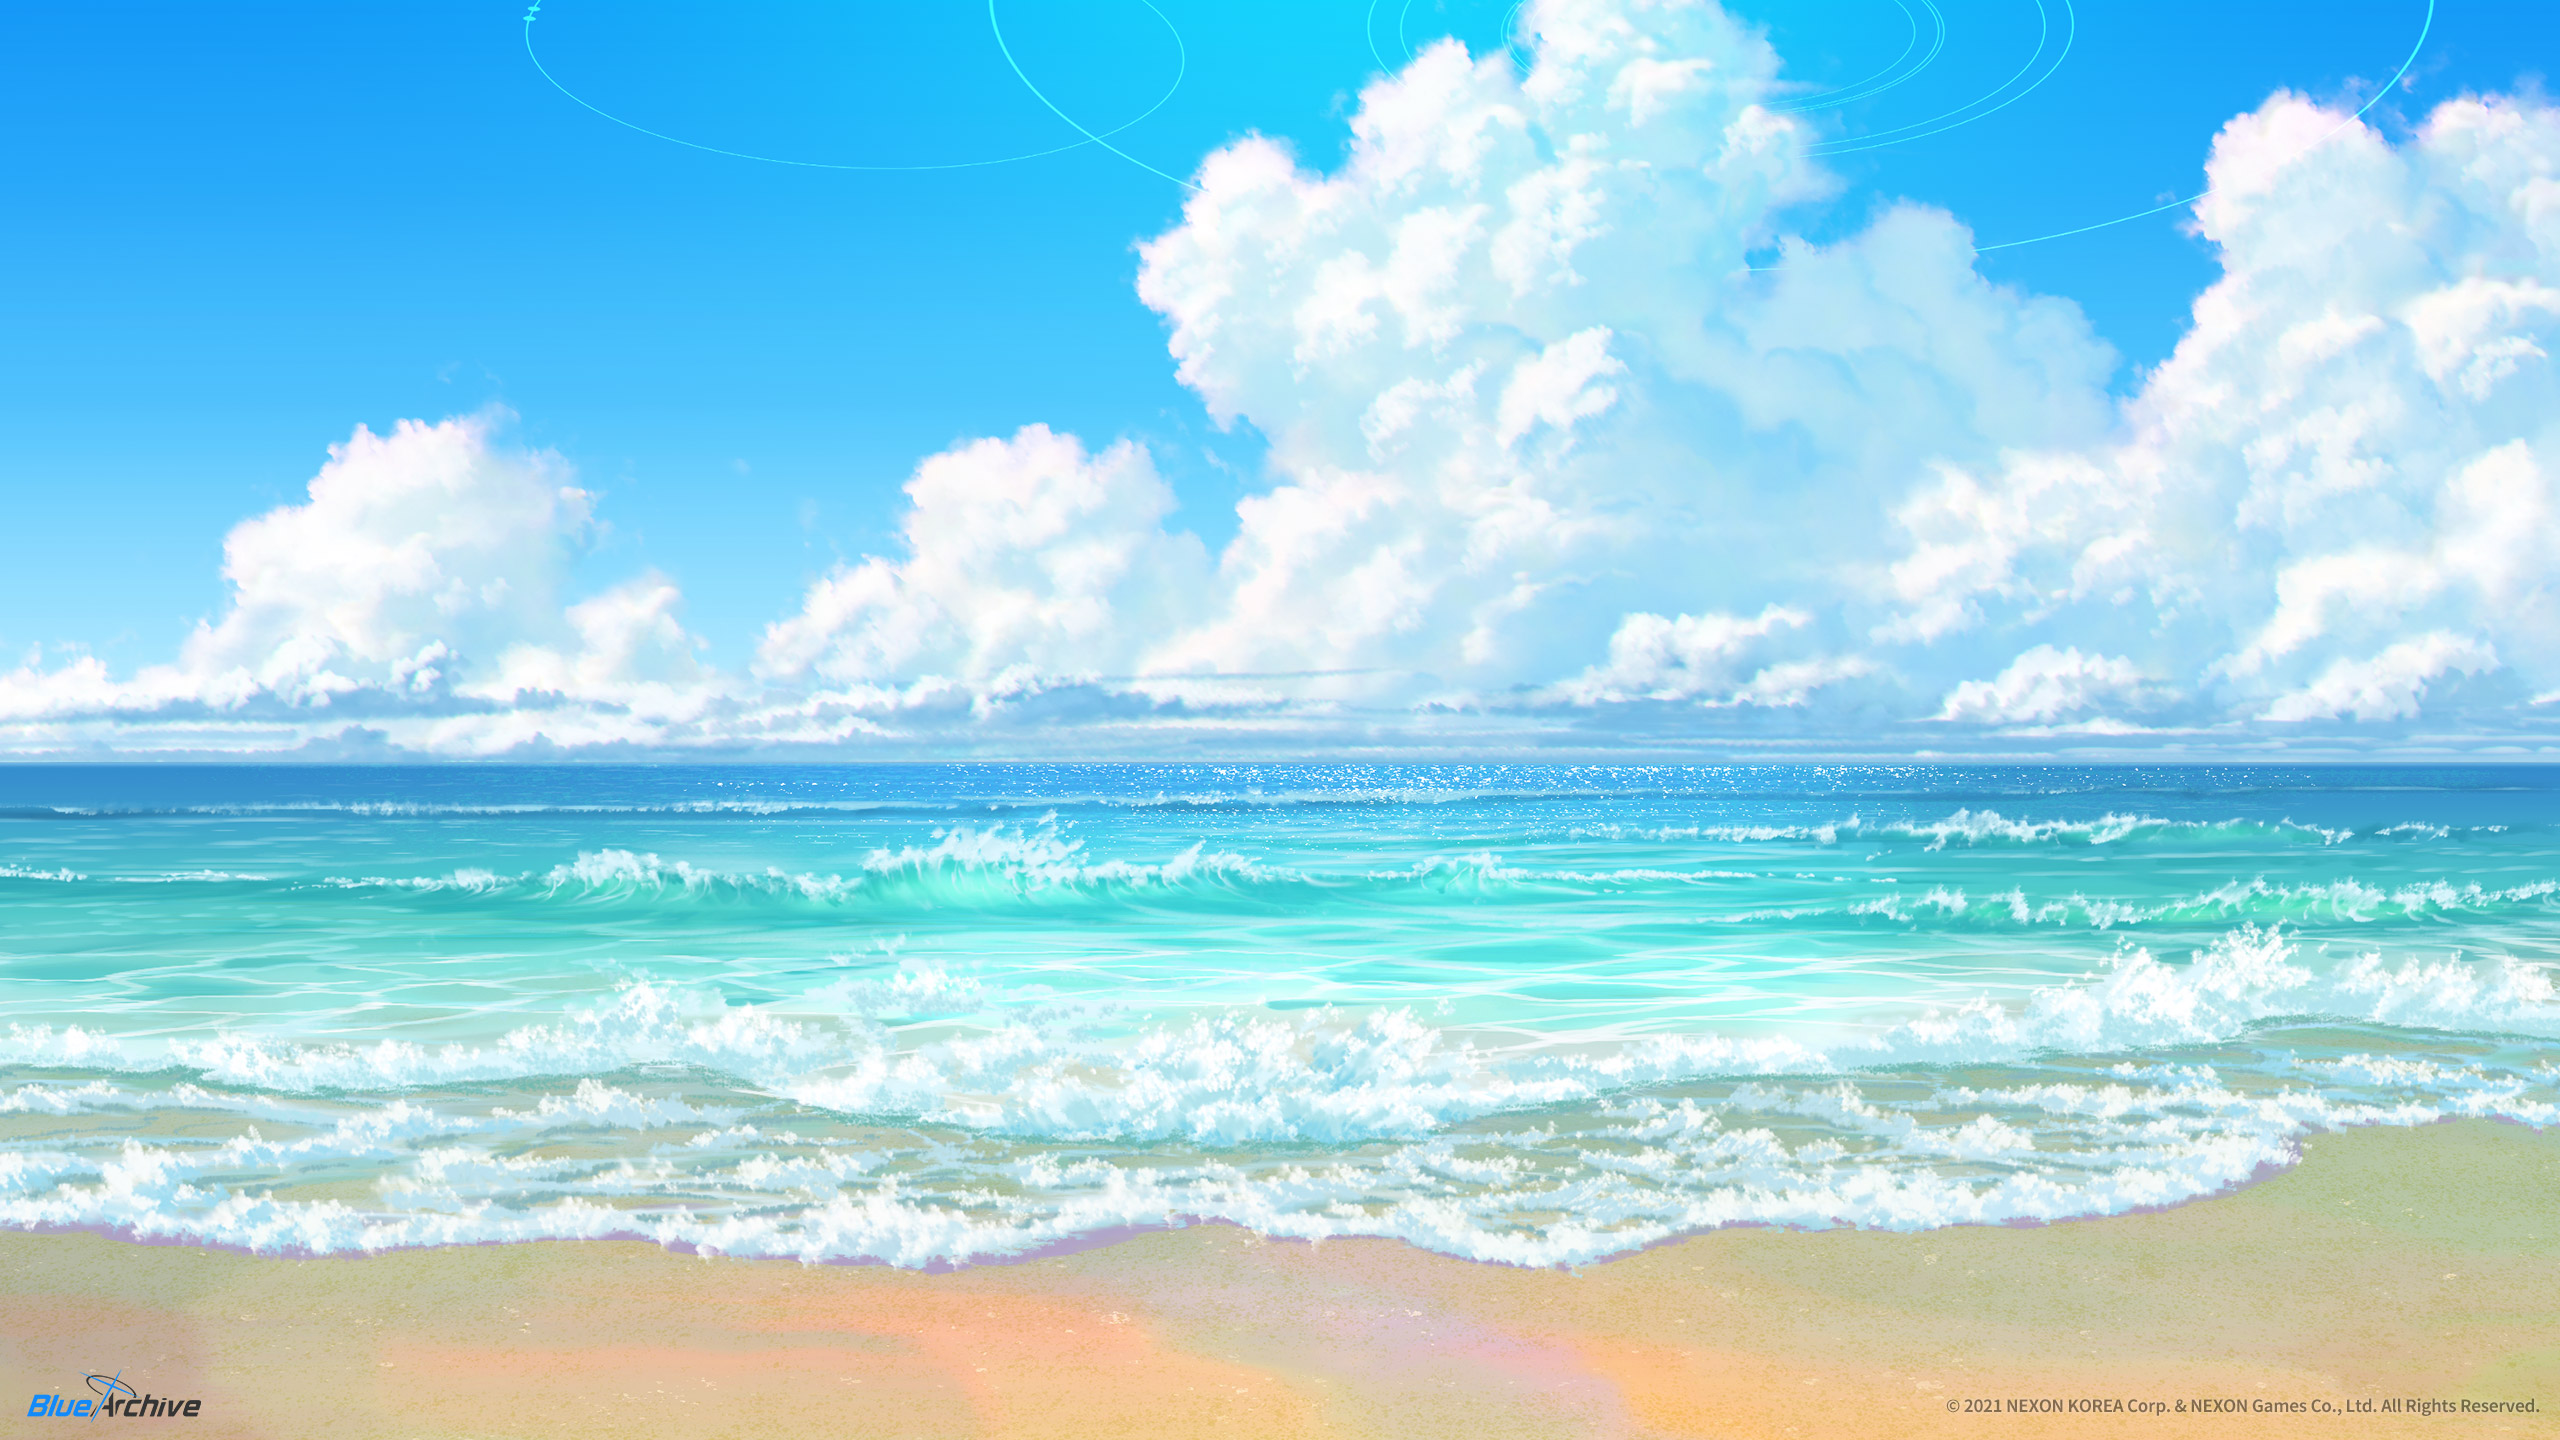 Anime 2560x1440 Blue Archive beach sea water waves clouds